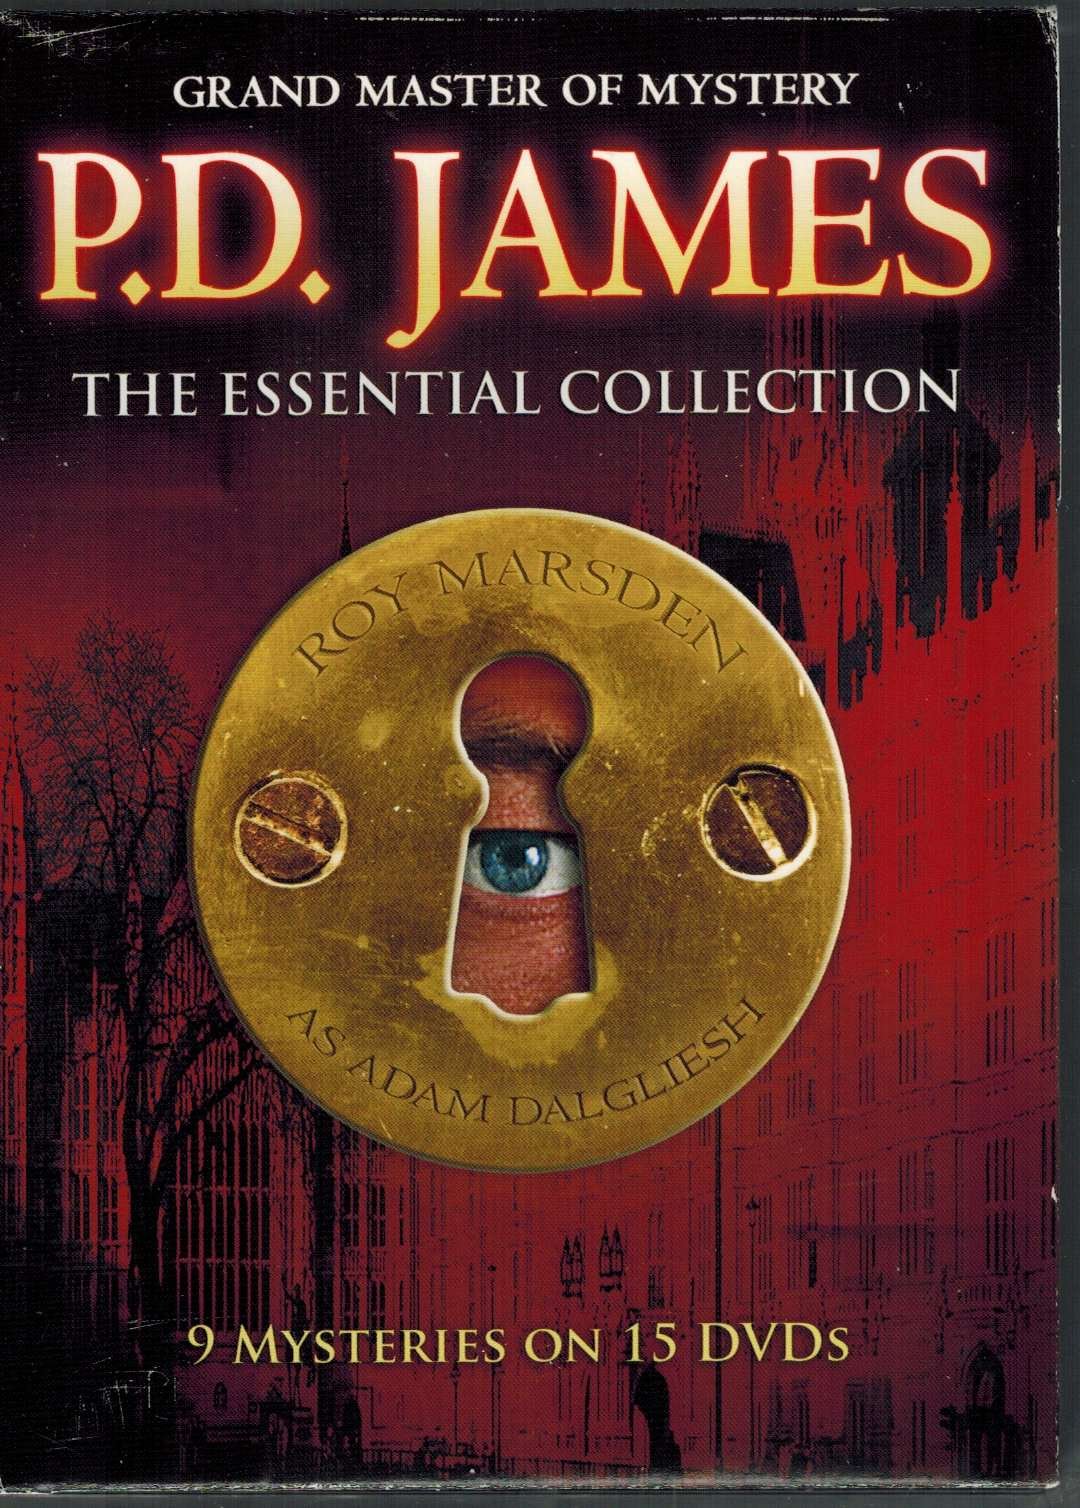 P.D. James: The Essential Collection (15 DVD) on MovieShack